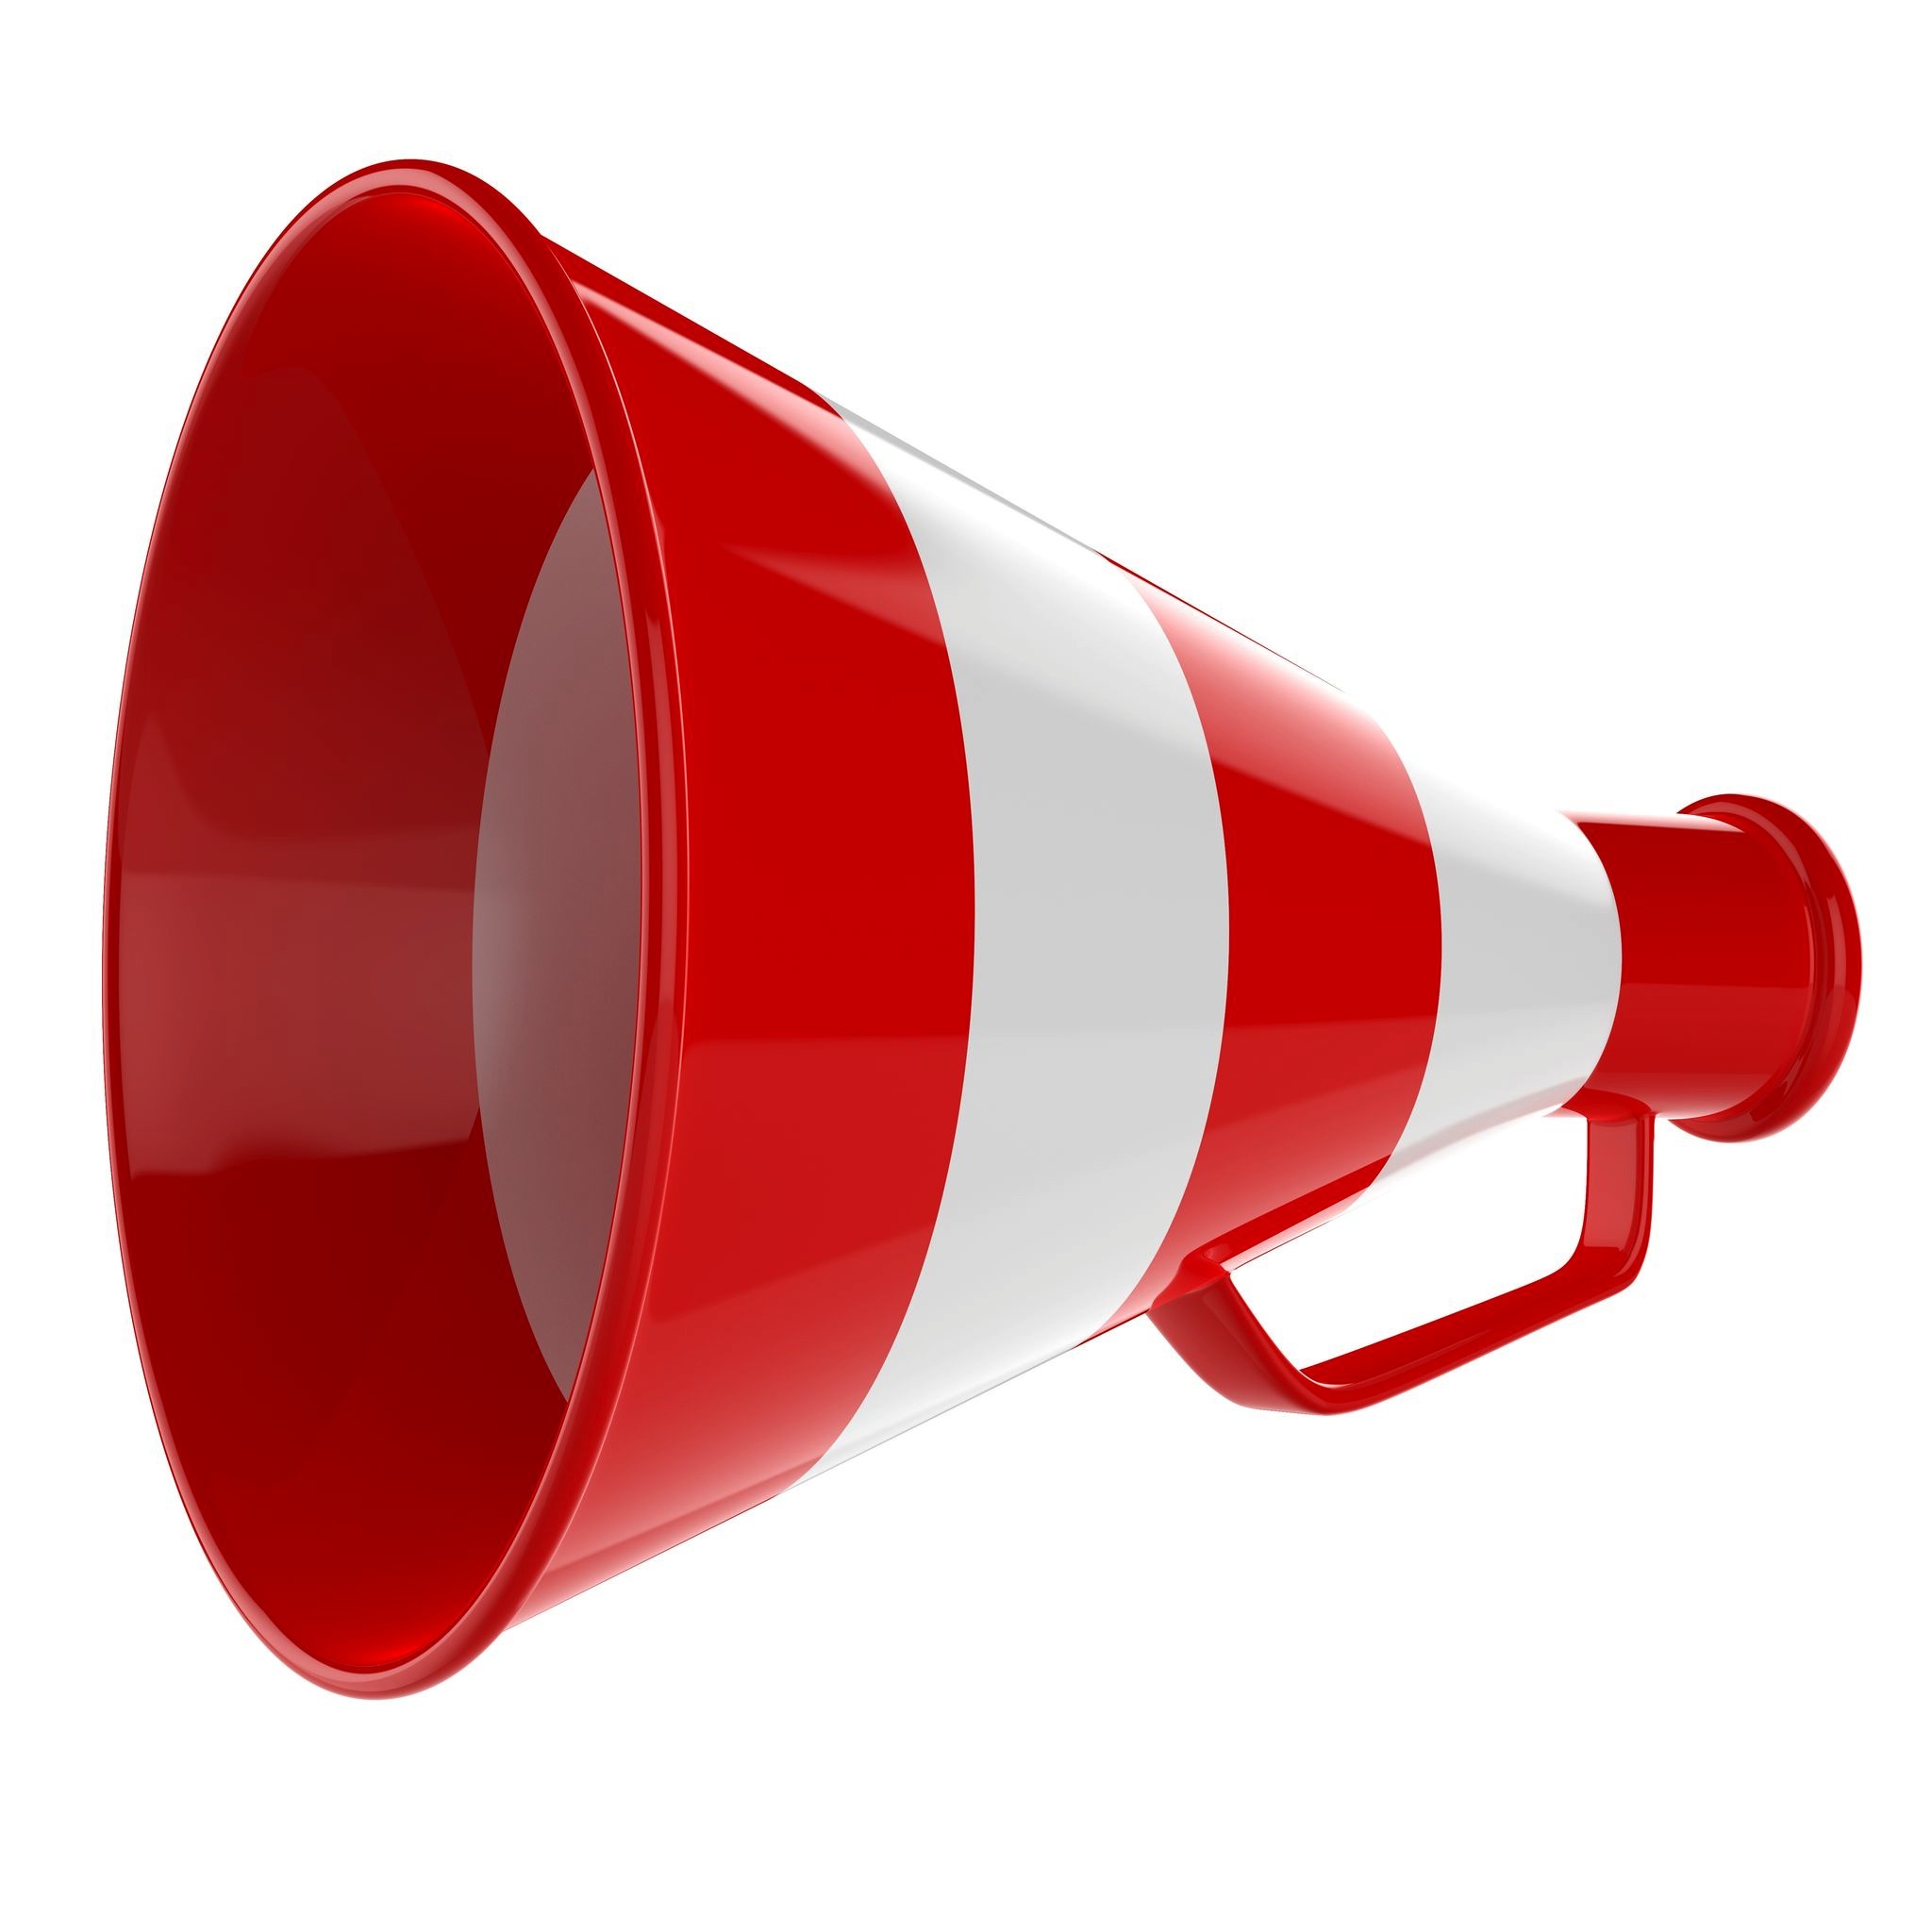 Red cheering megaphone clipart clipart image 1